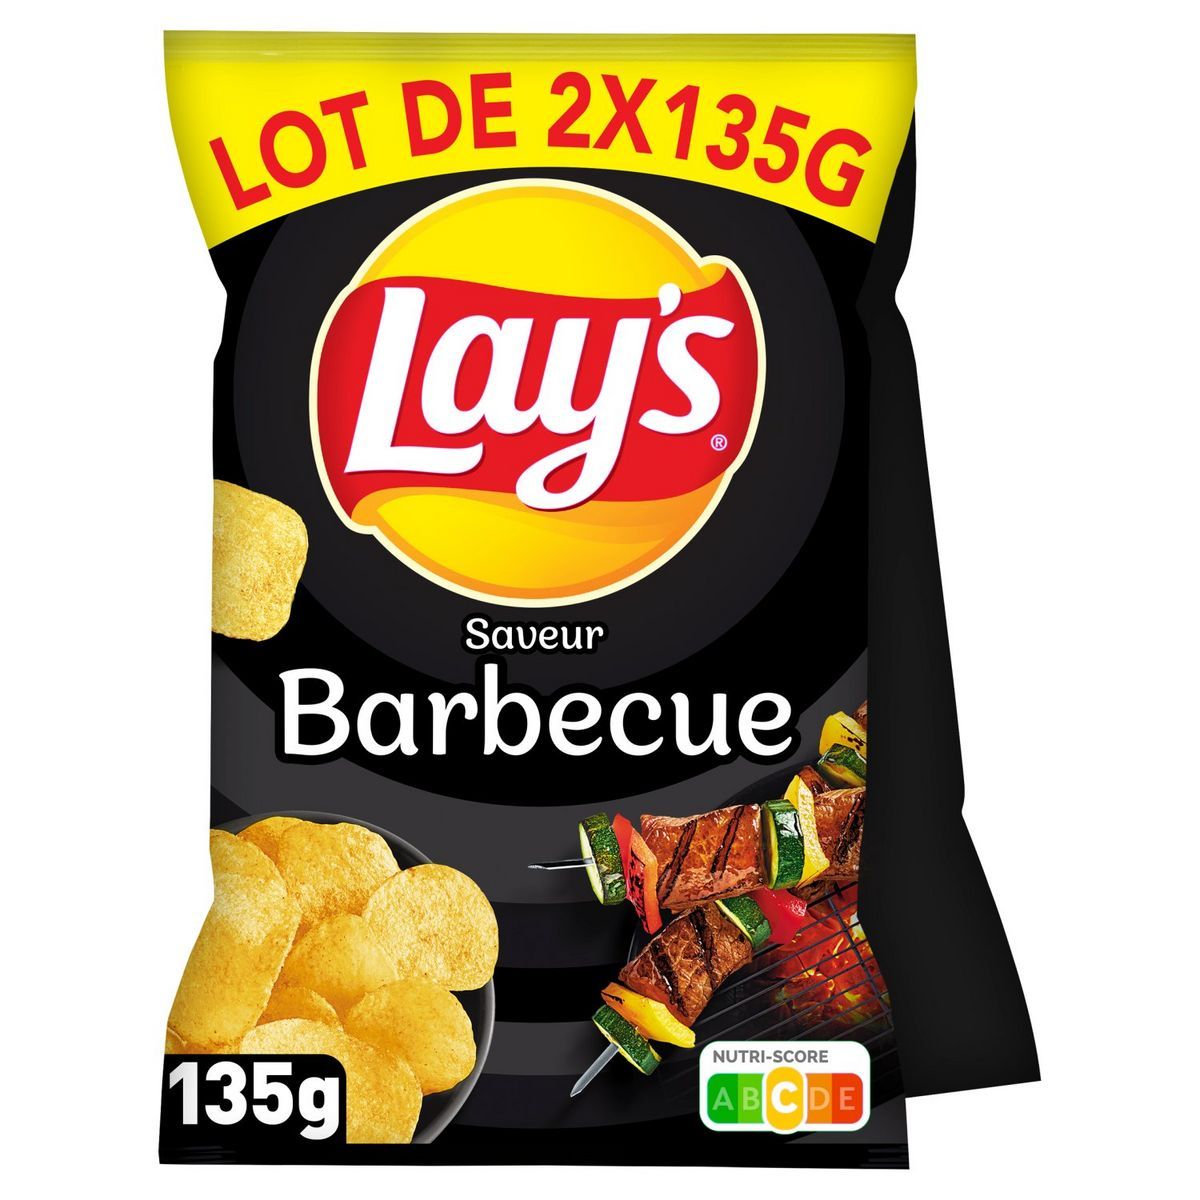 CHIPS SAVEUR BARBECUE LAY'S